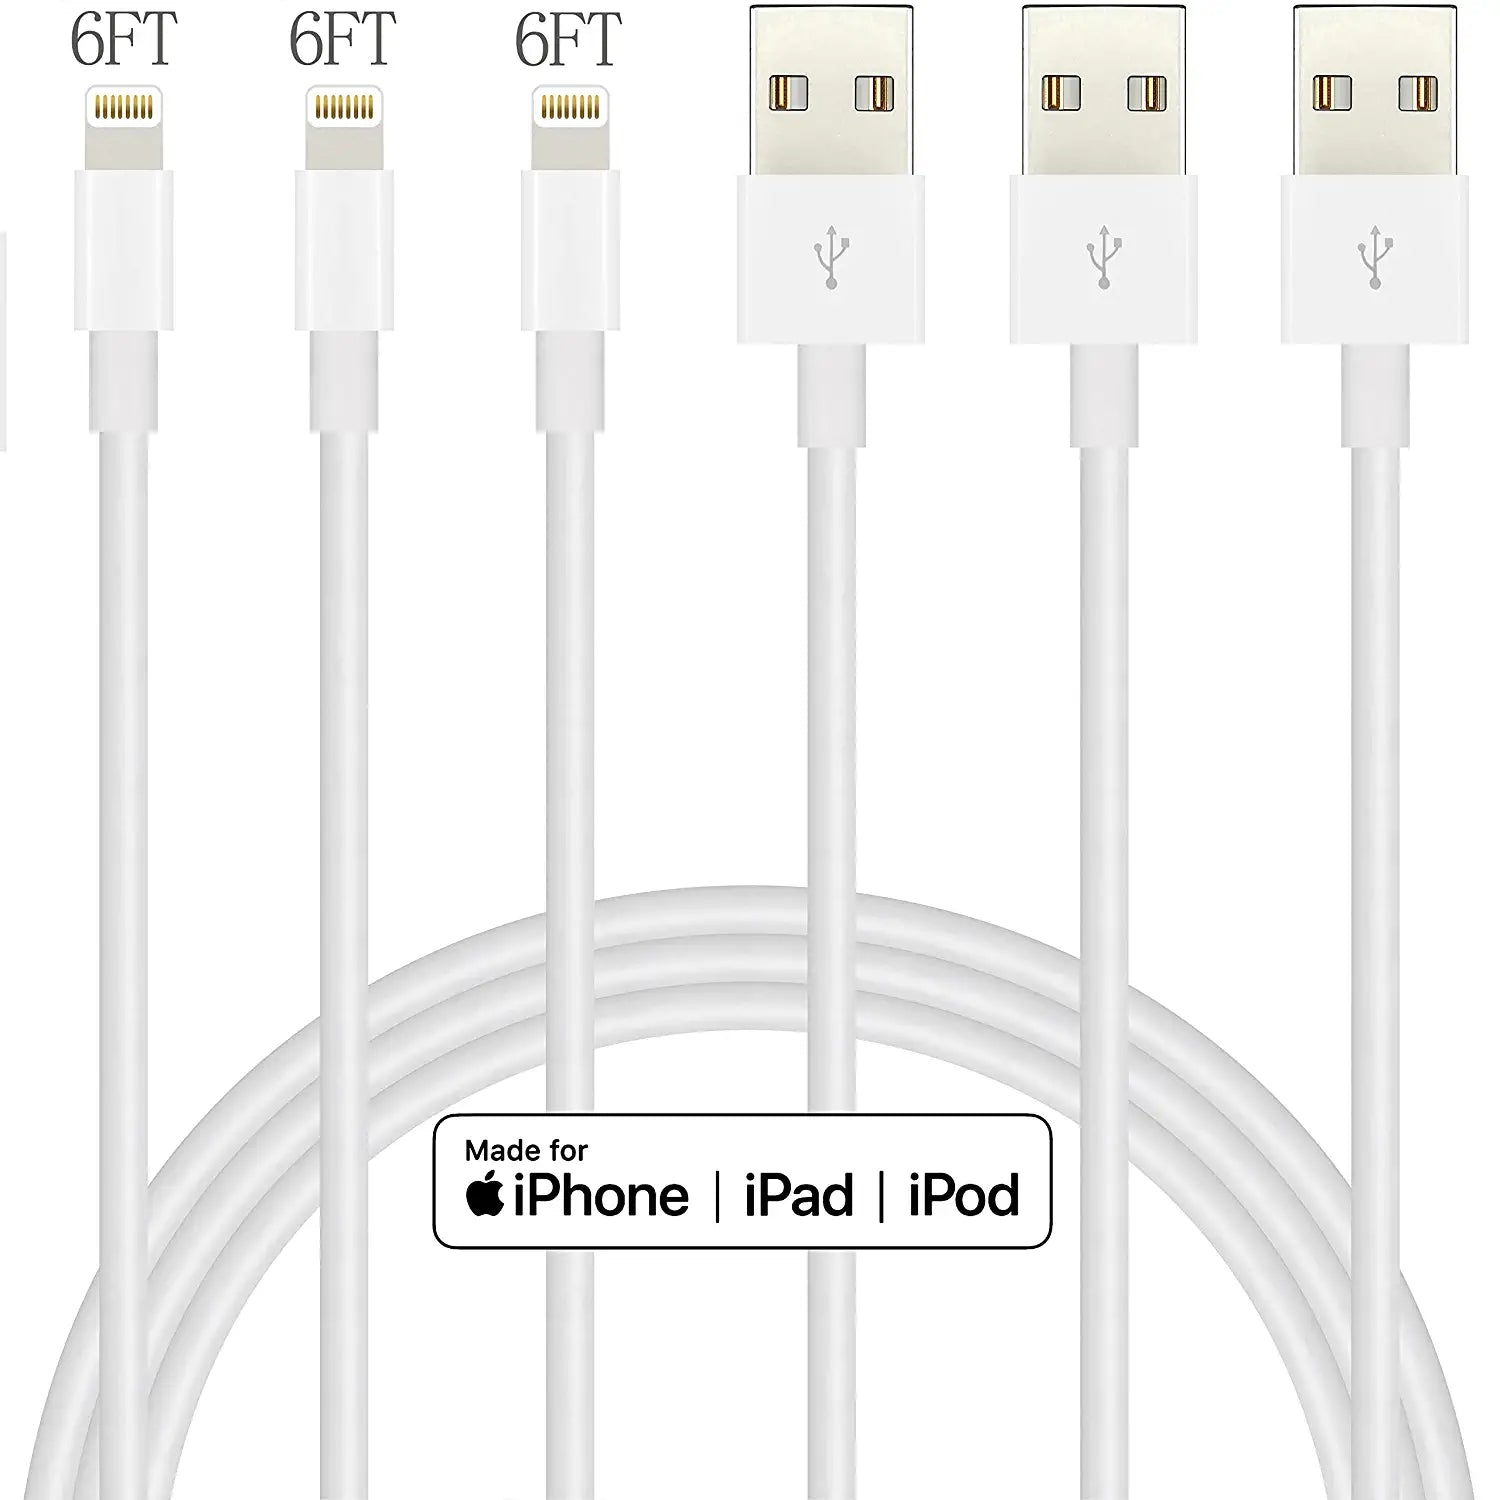 Iphone Charger Lightning Cable 3Pack(6/6/6Ft) Quick Charger Rapid Cord Apple Mfi Certified for Apple Charger, Iphone 13 12 11 Pro X XR XS MAX 8 plus 7 6S 5S 5C Air Ipad Mini Ipod (Grey)